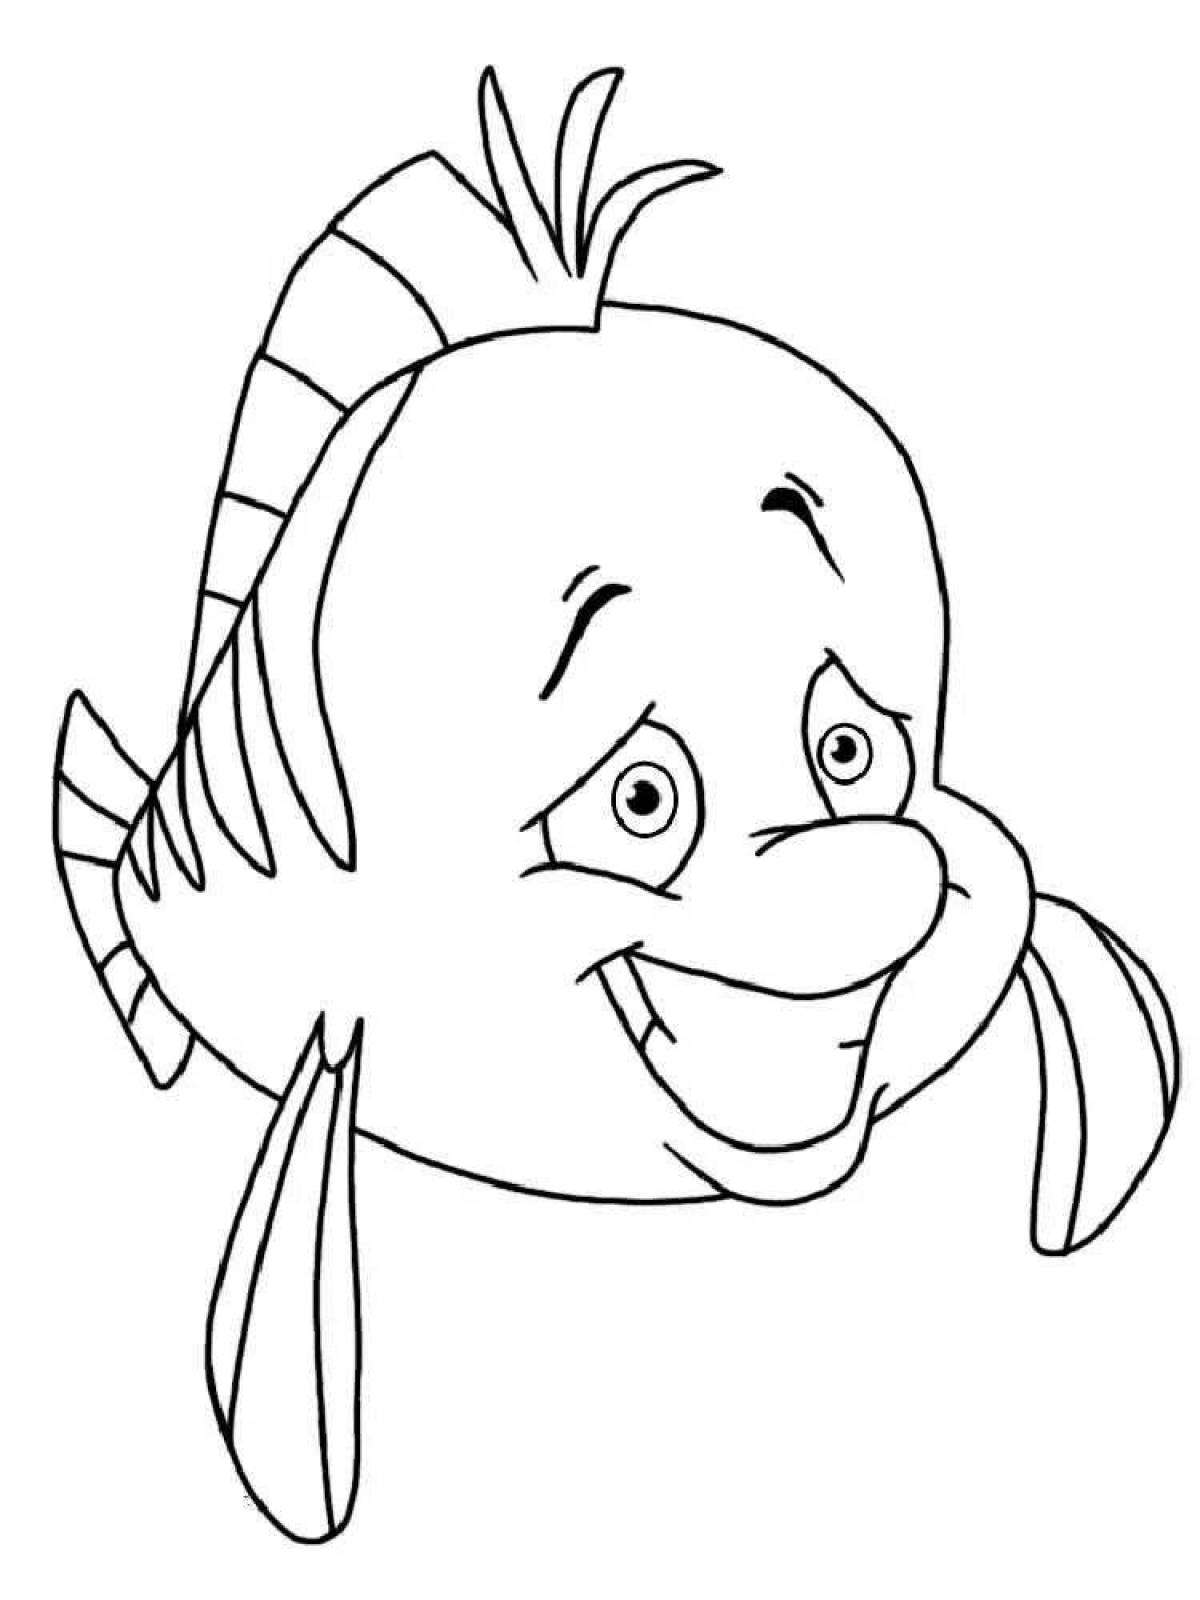 Radiant floater coloring page